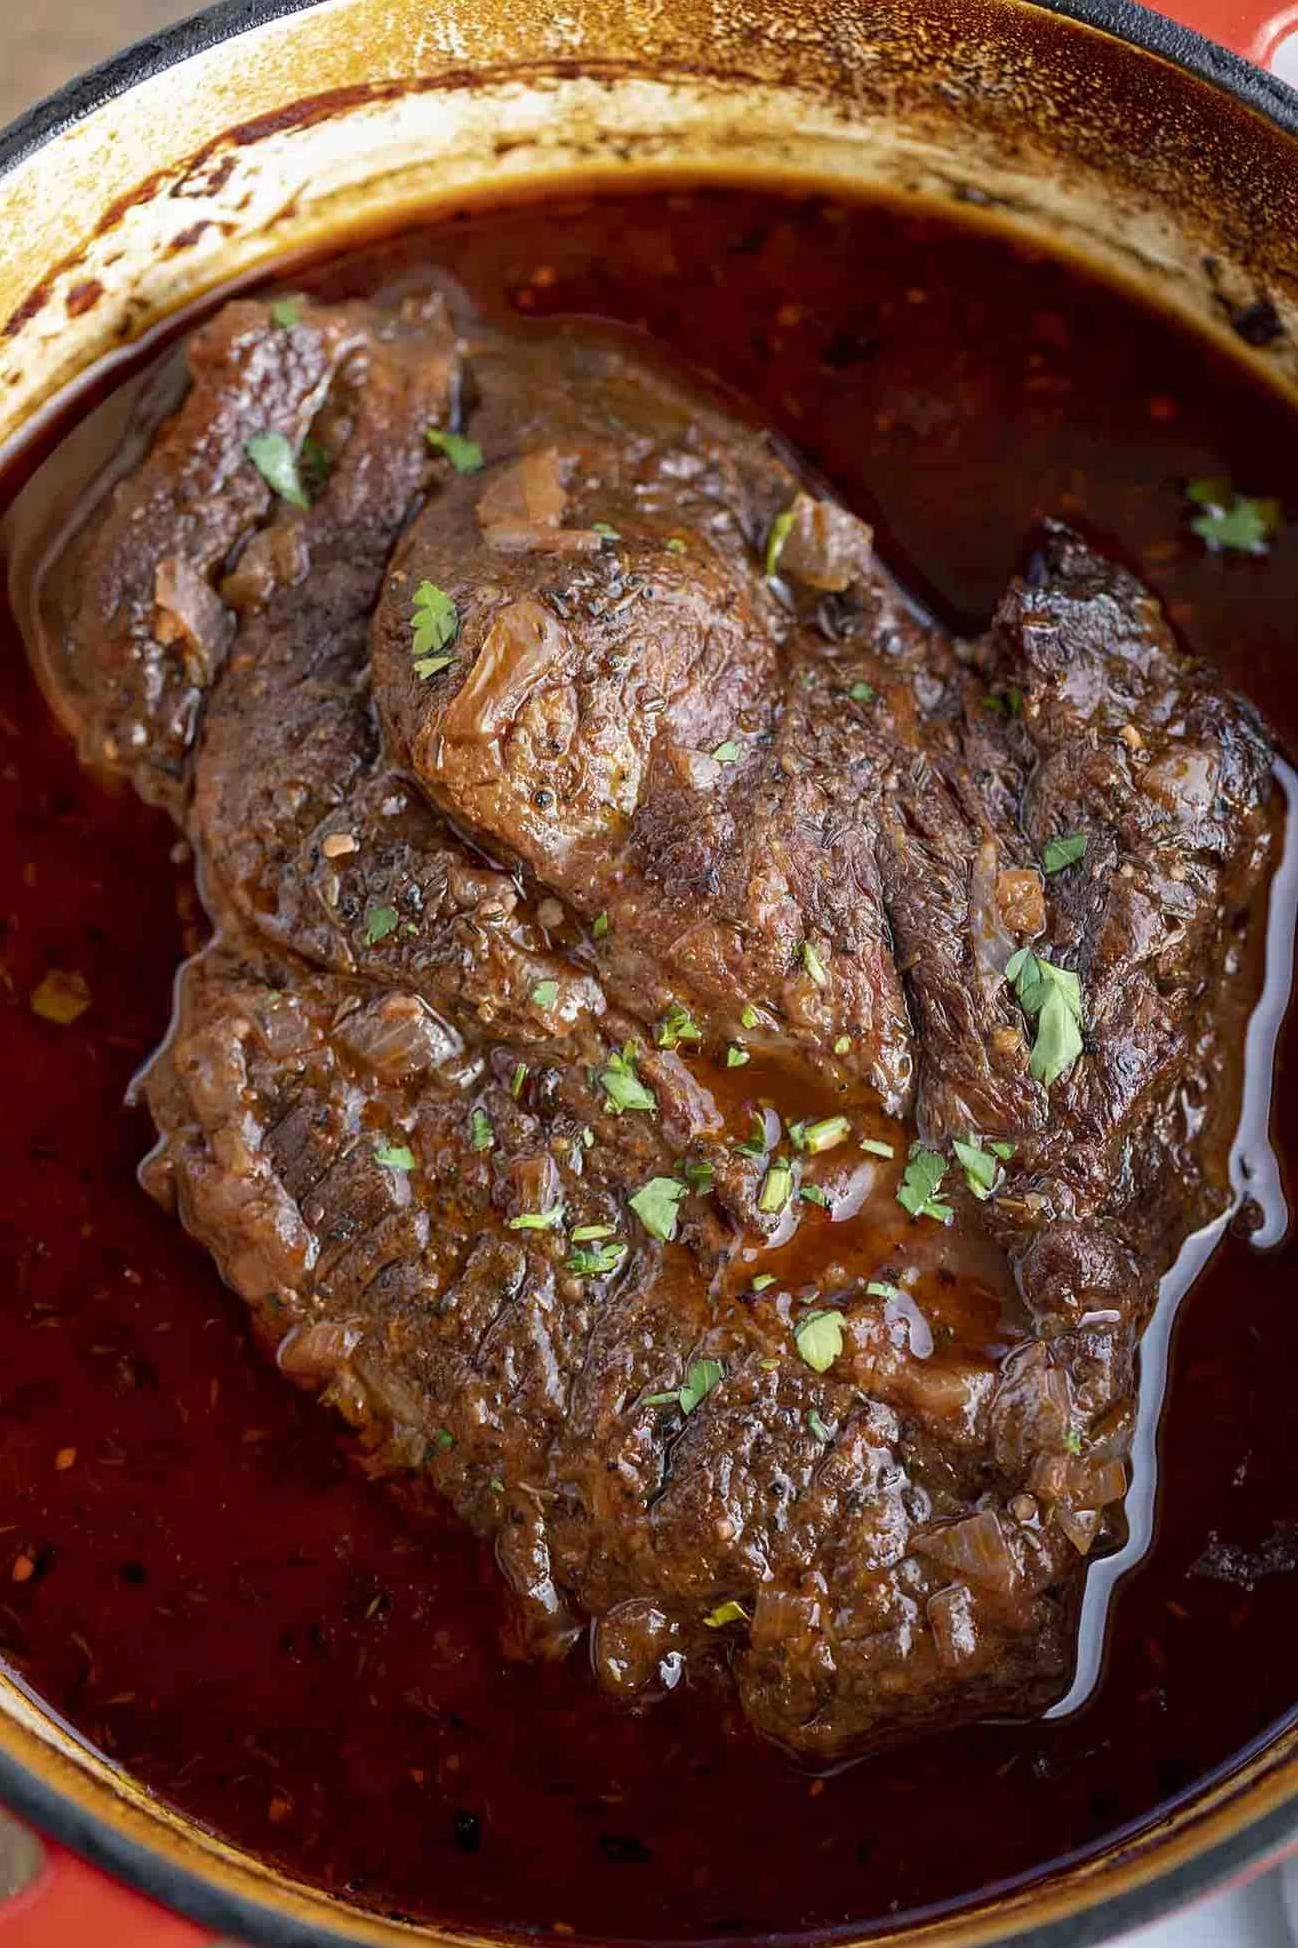  Let your taste buds wander with this wine-infused pot roast.